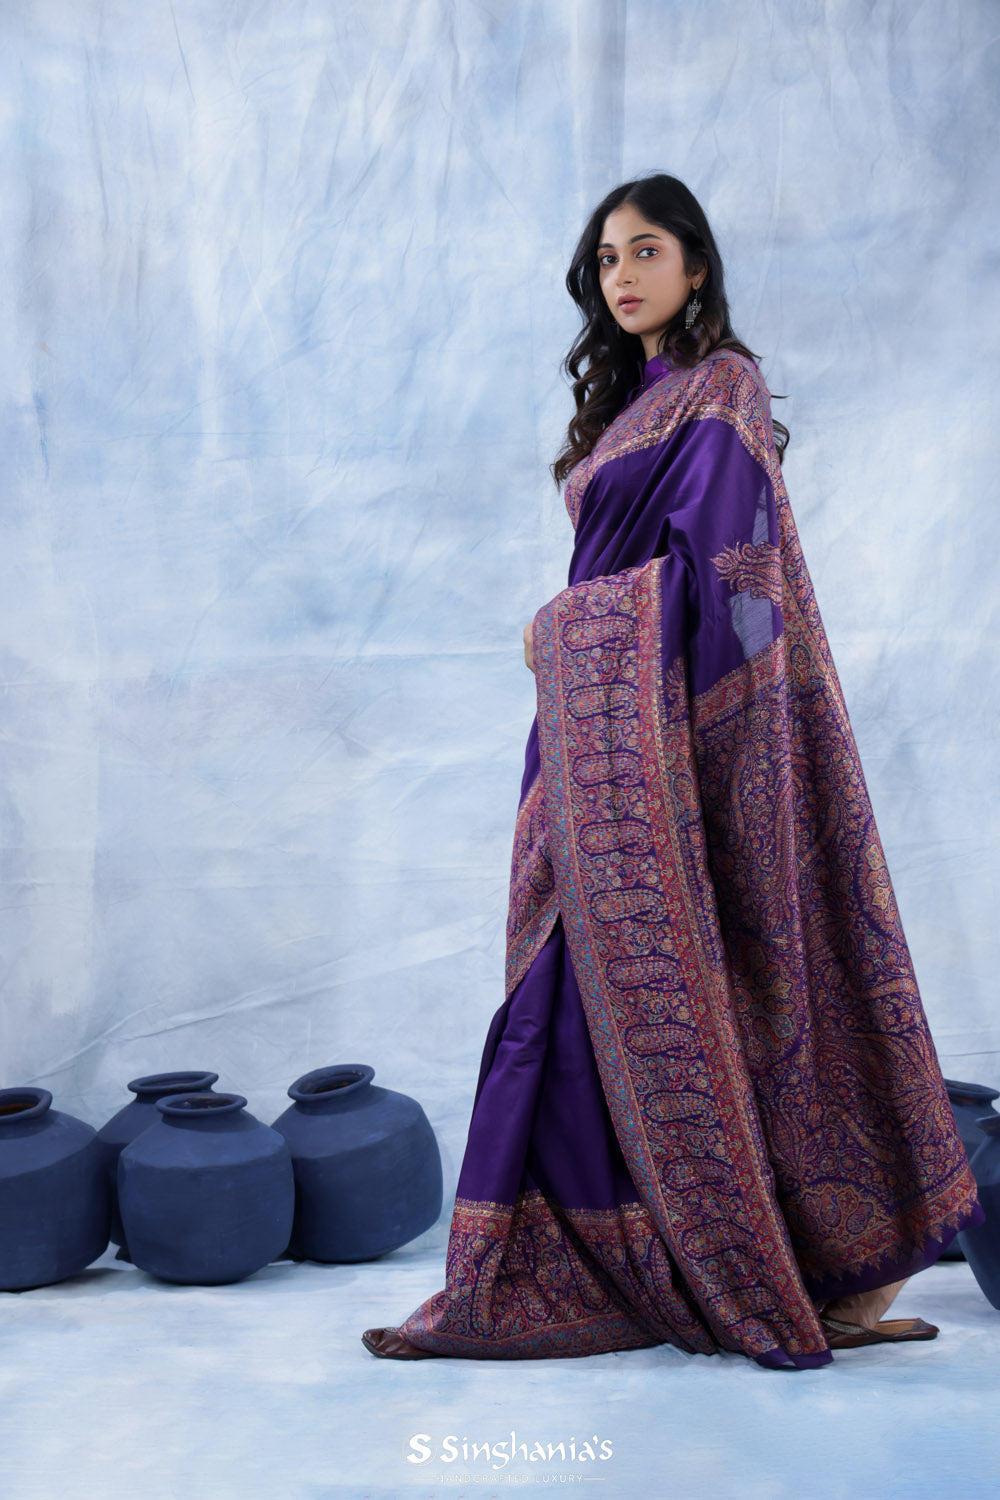 Mythical Purple Kani Handloom Saree With Floral Motifs